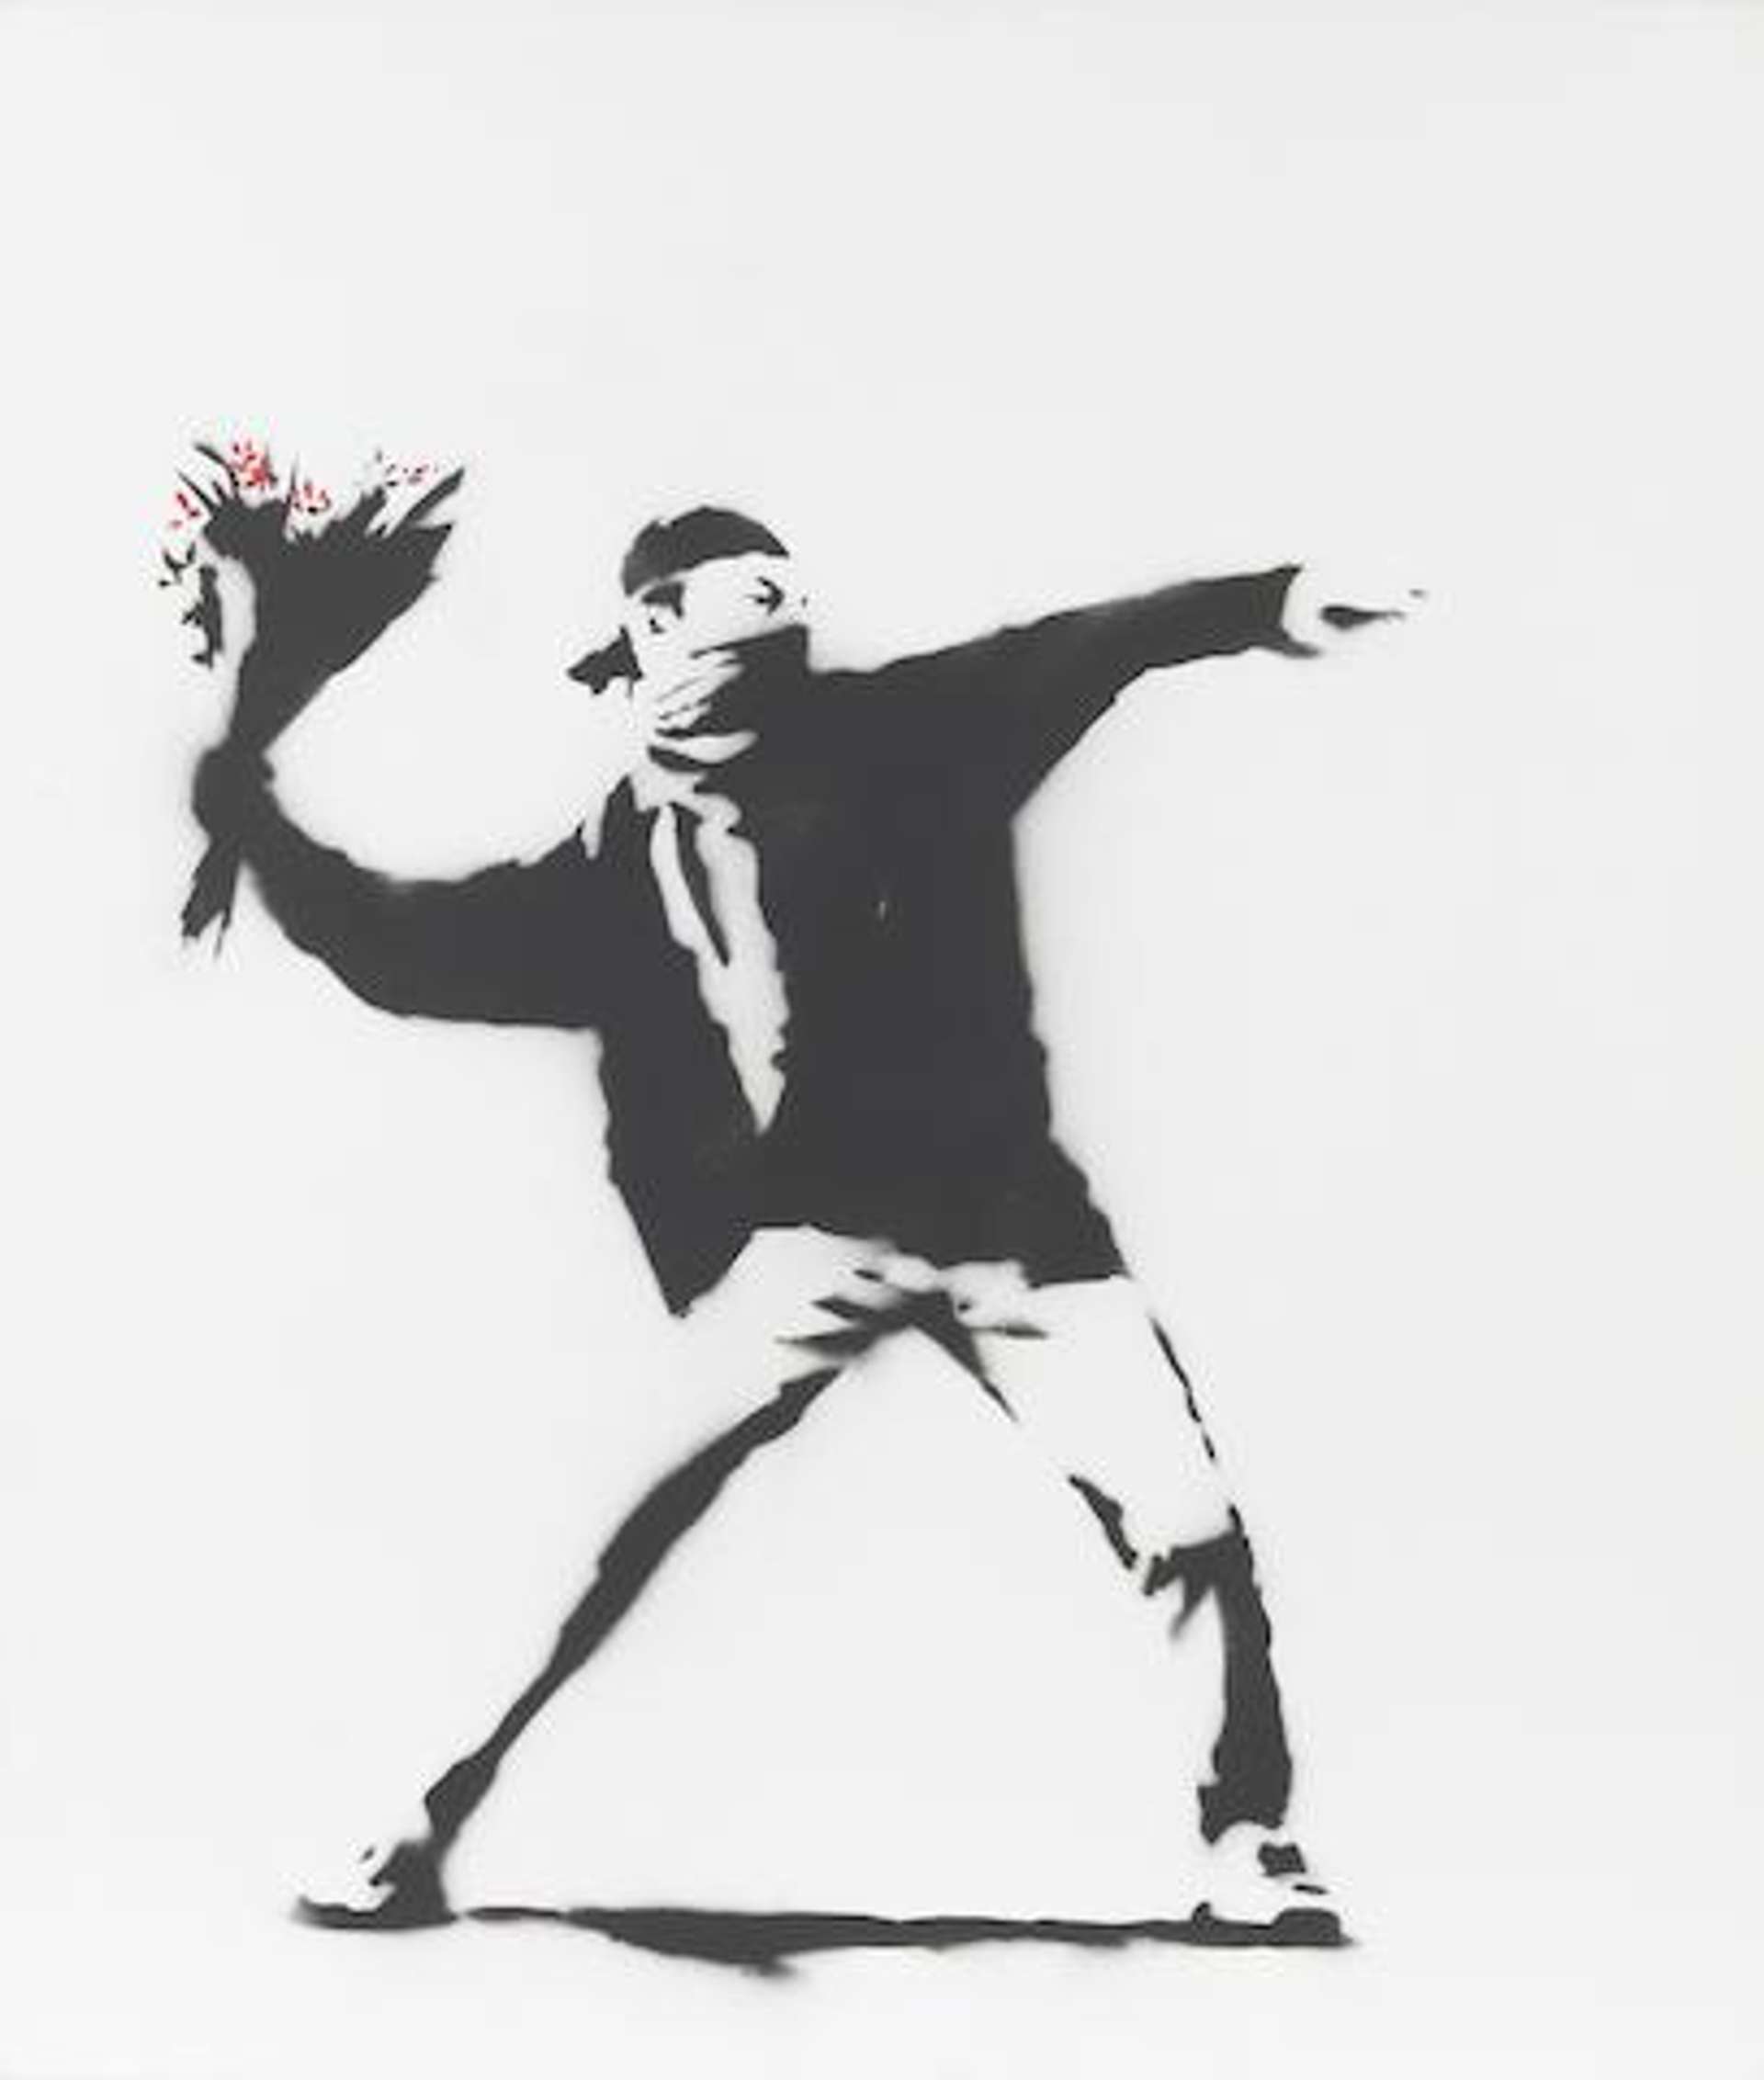 Banksy, the anonymous artist using social media as a personal art